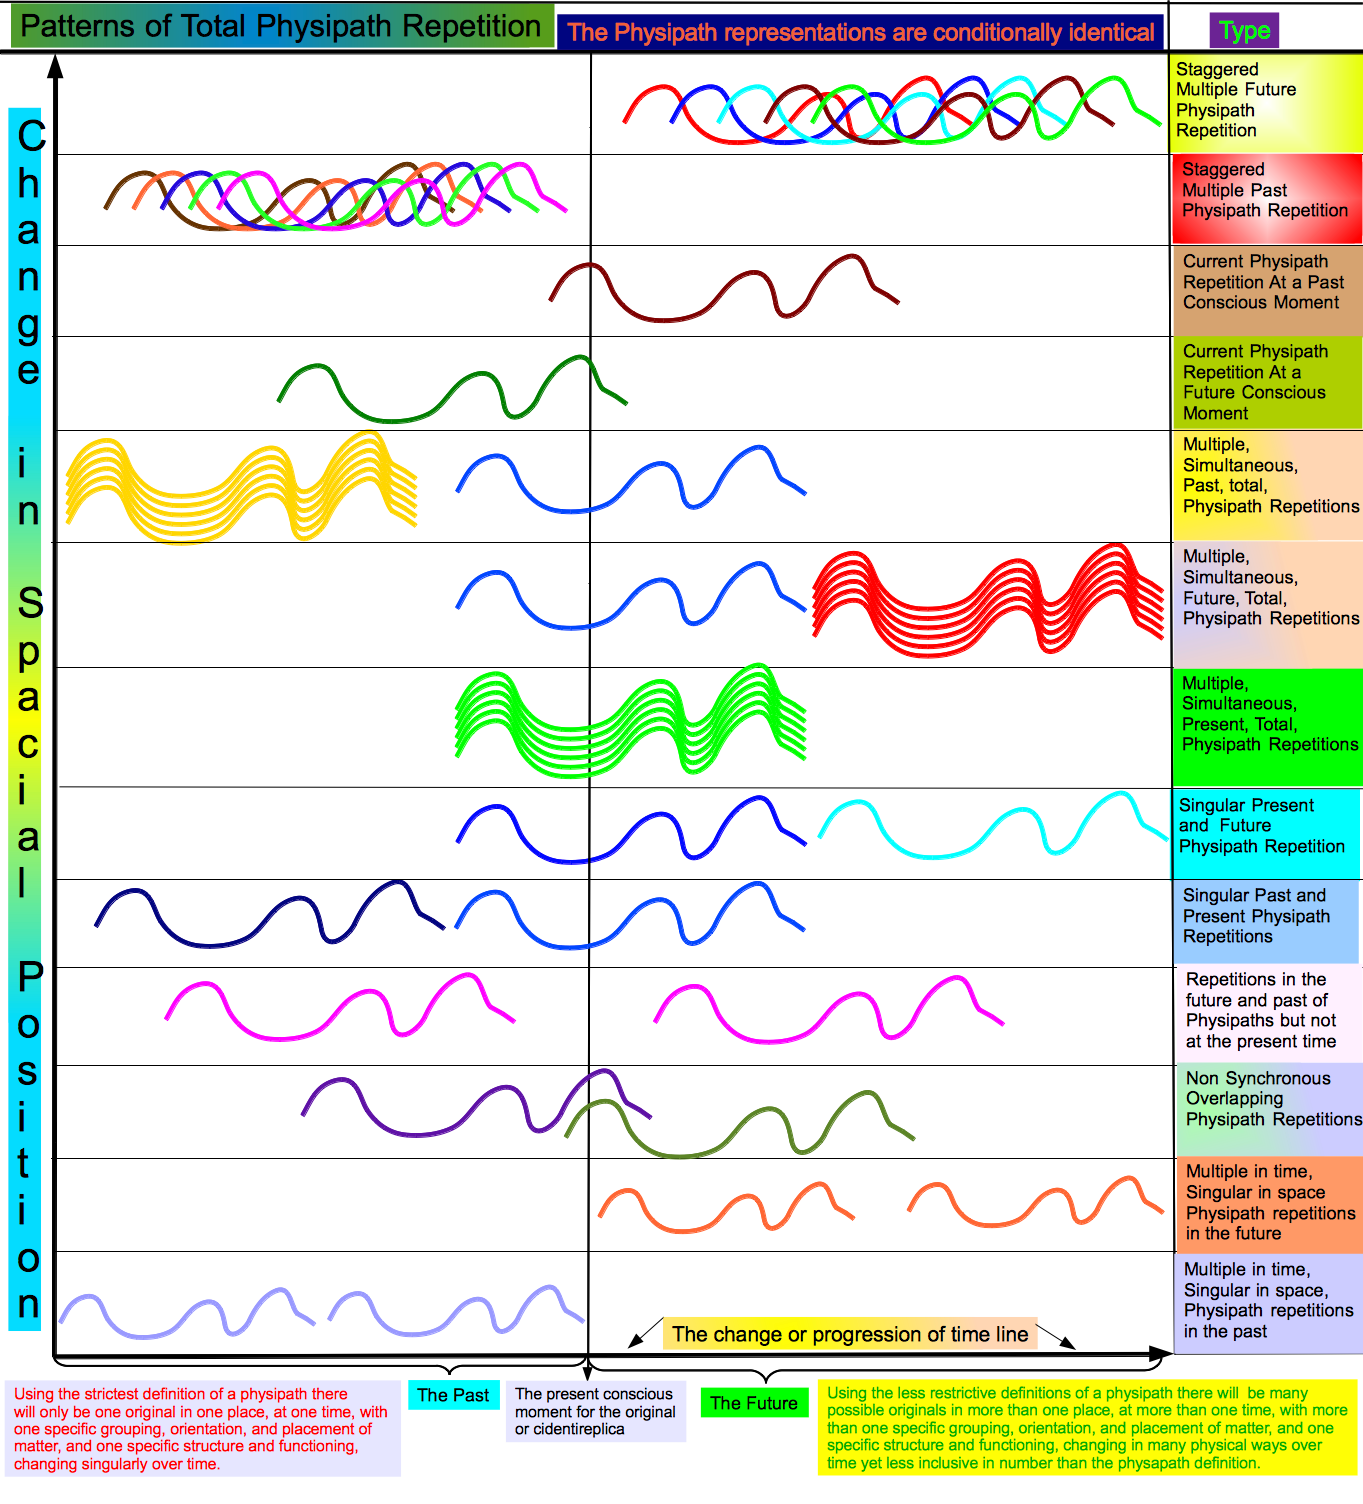 Patterns of Total Physipath repetition.png